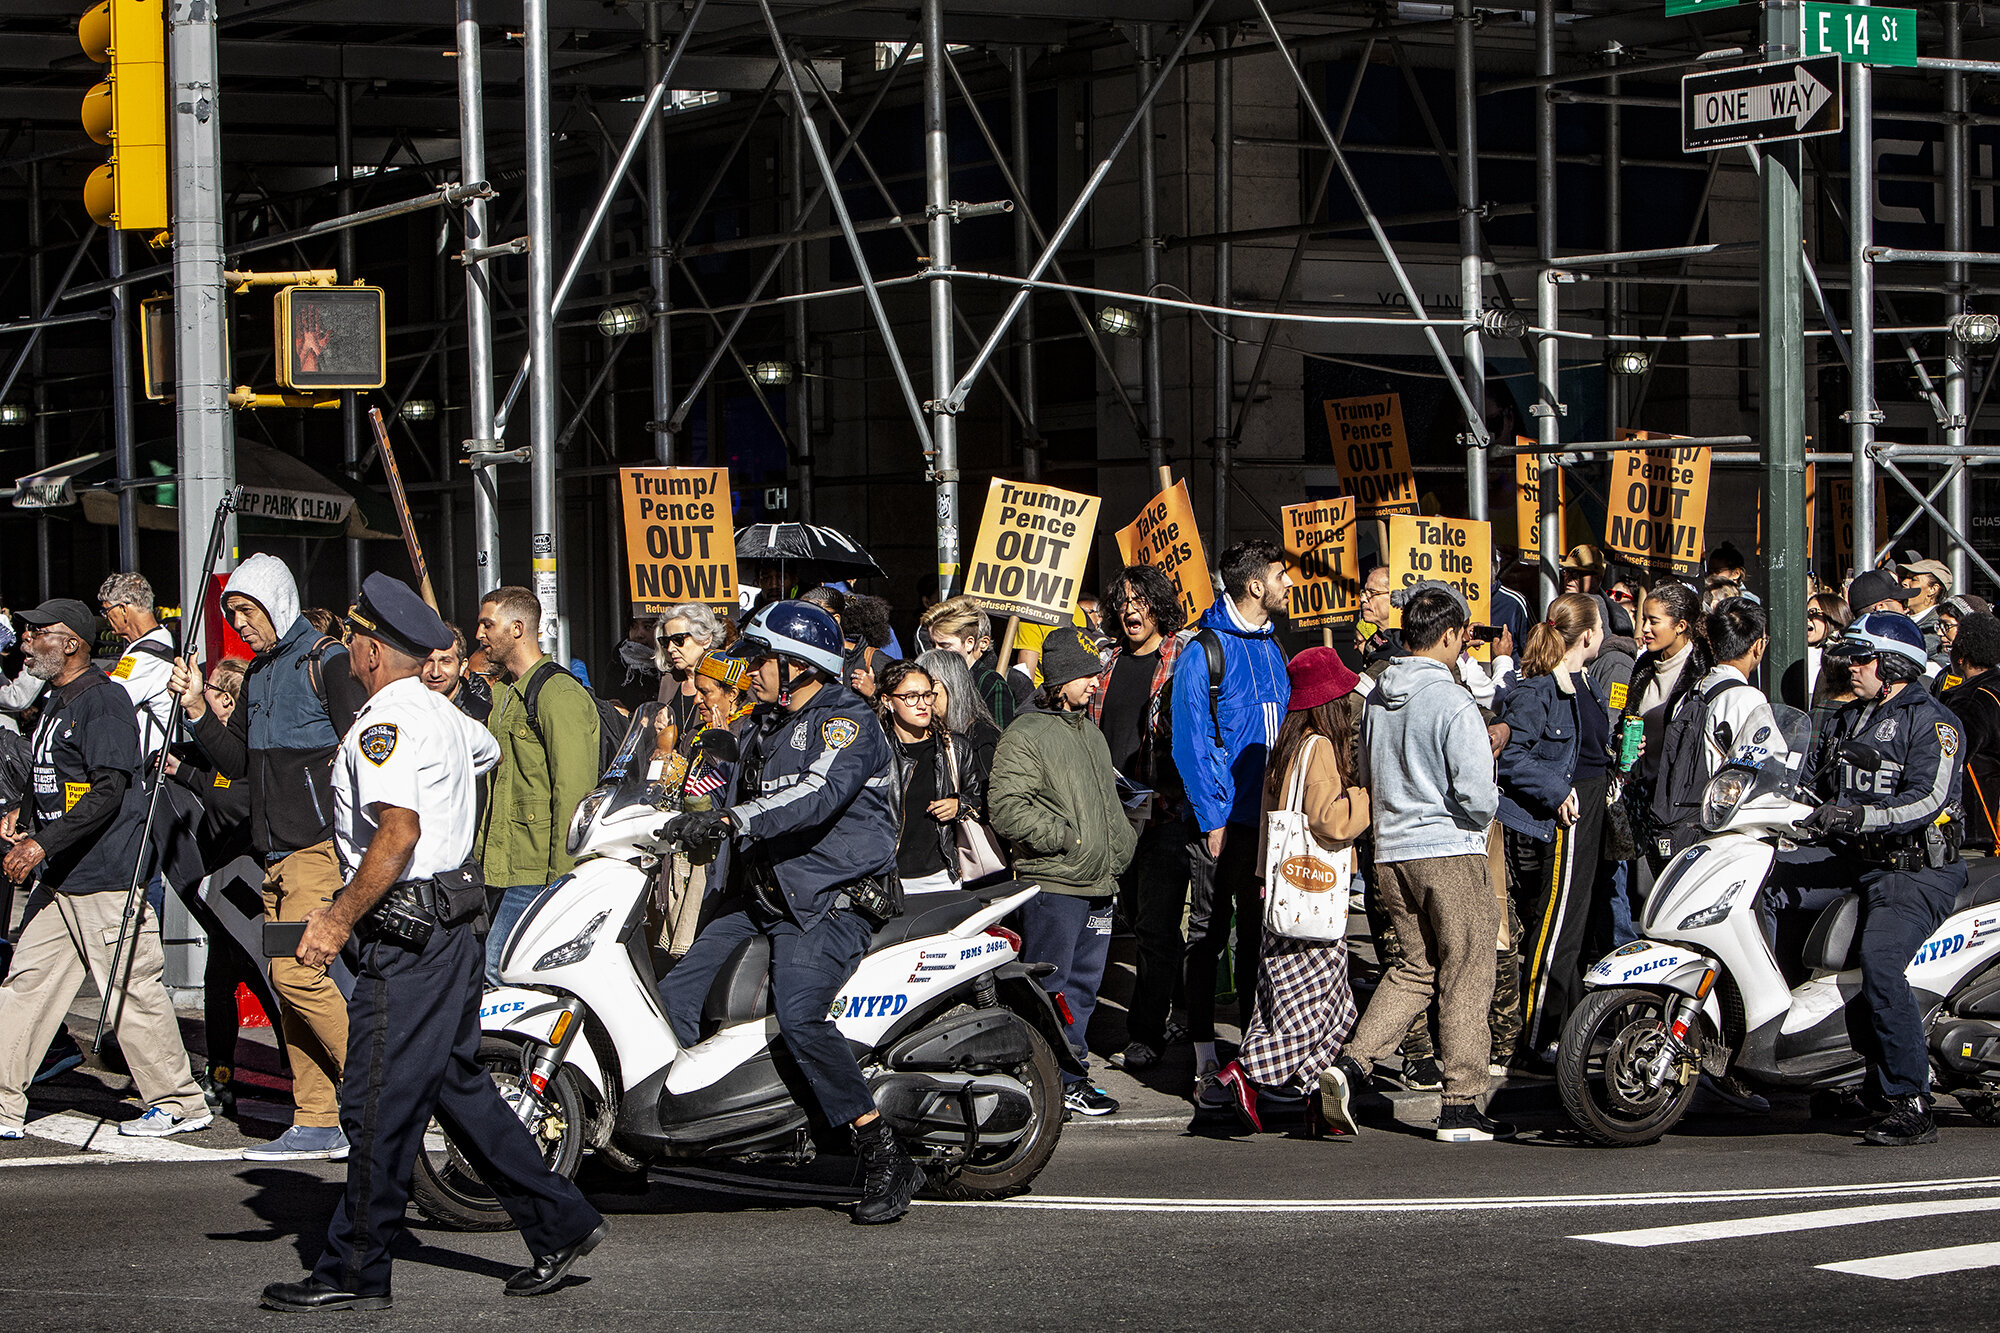 OUTNOW_Protest_2019_NYC-0807.jpg